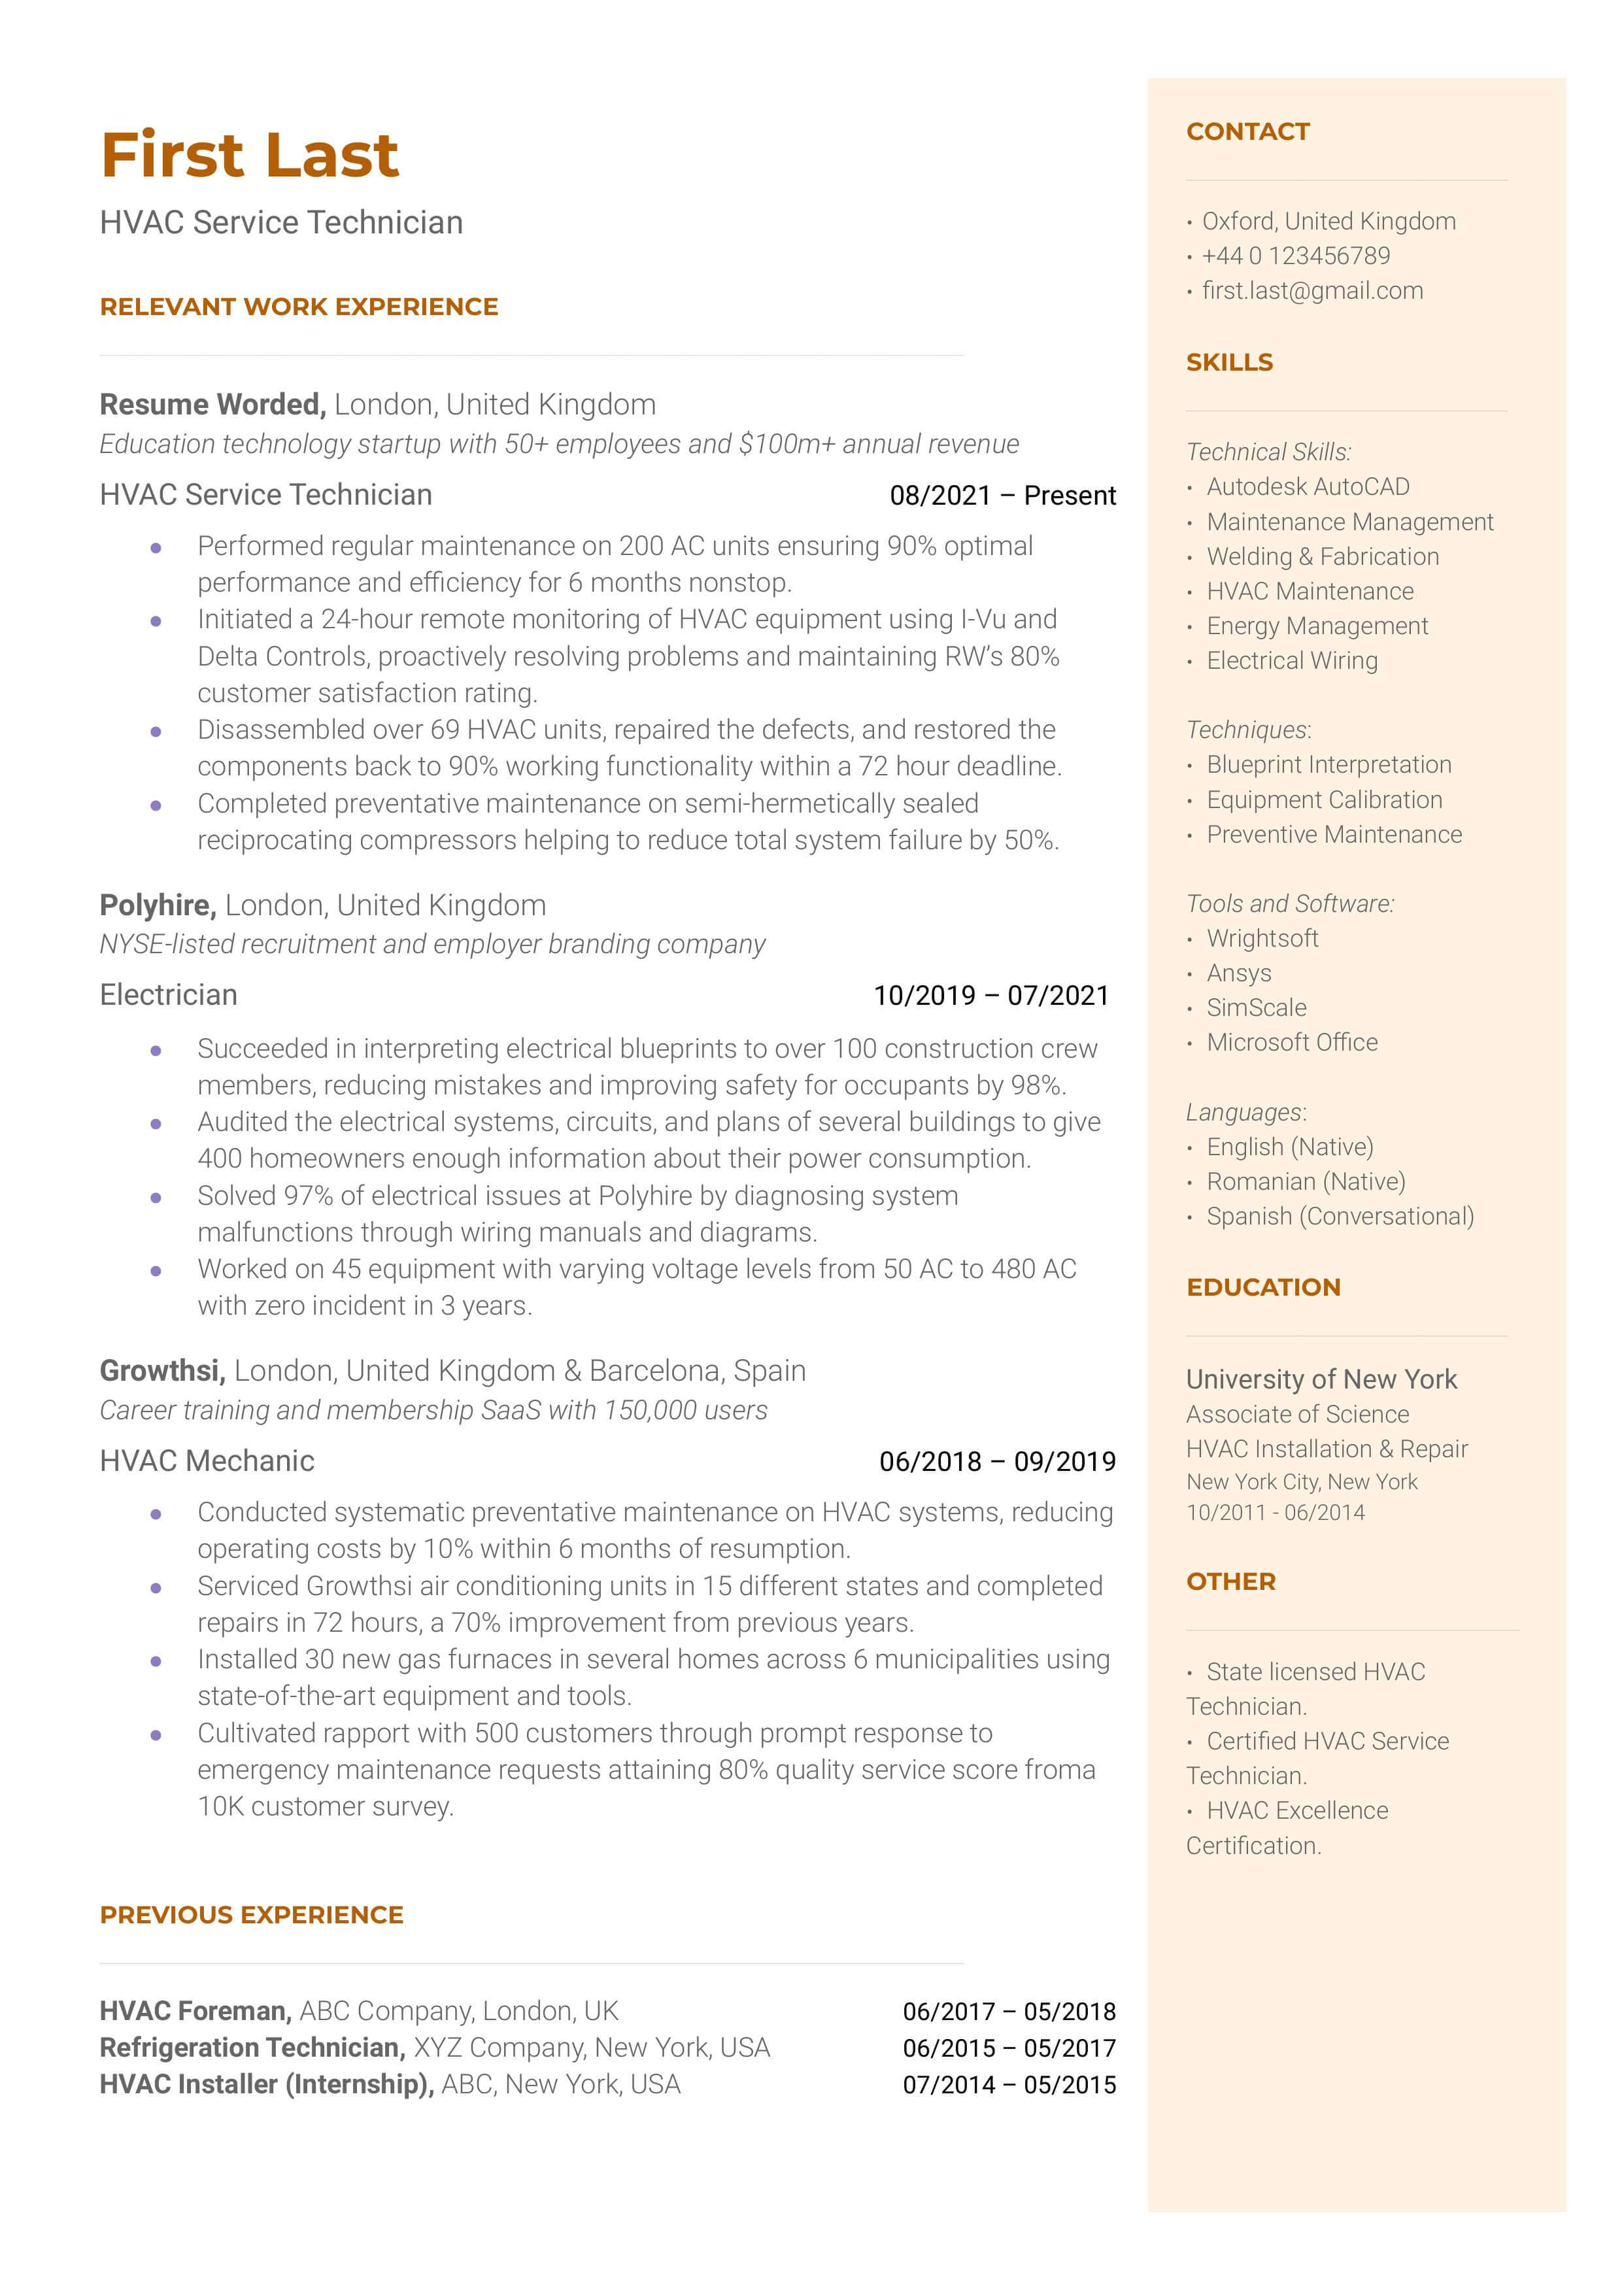 An HVAC resume template highlighting the applicant's HVAC-targeted skill set.